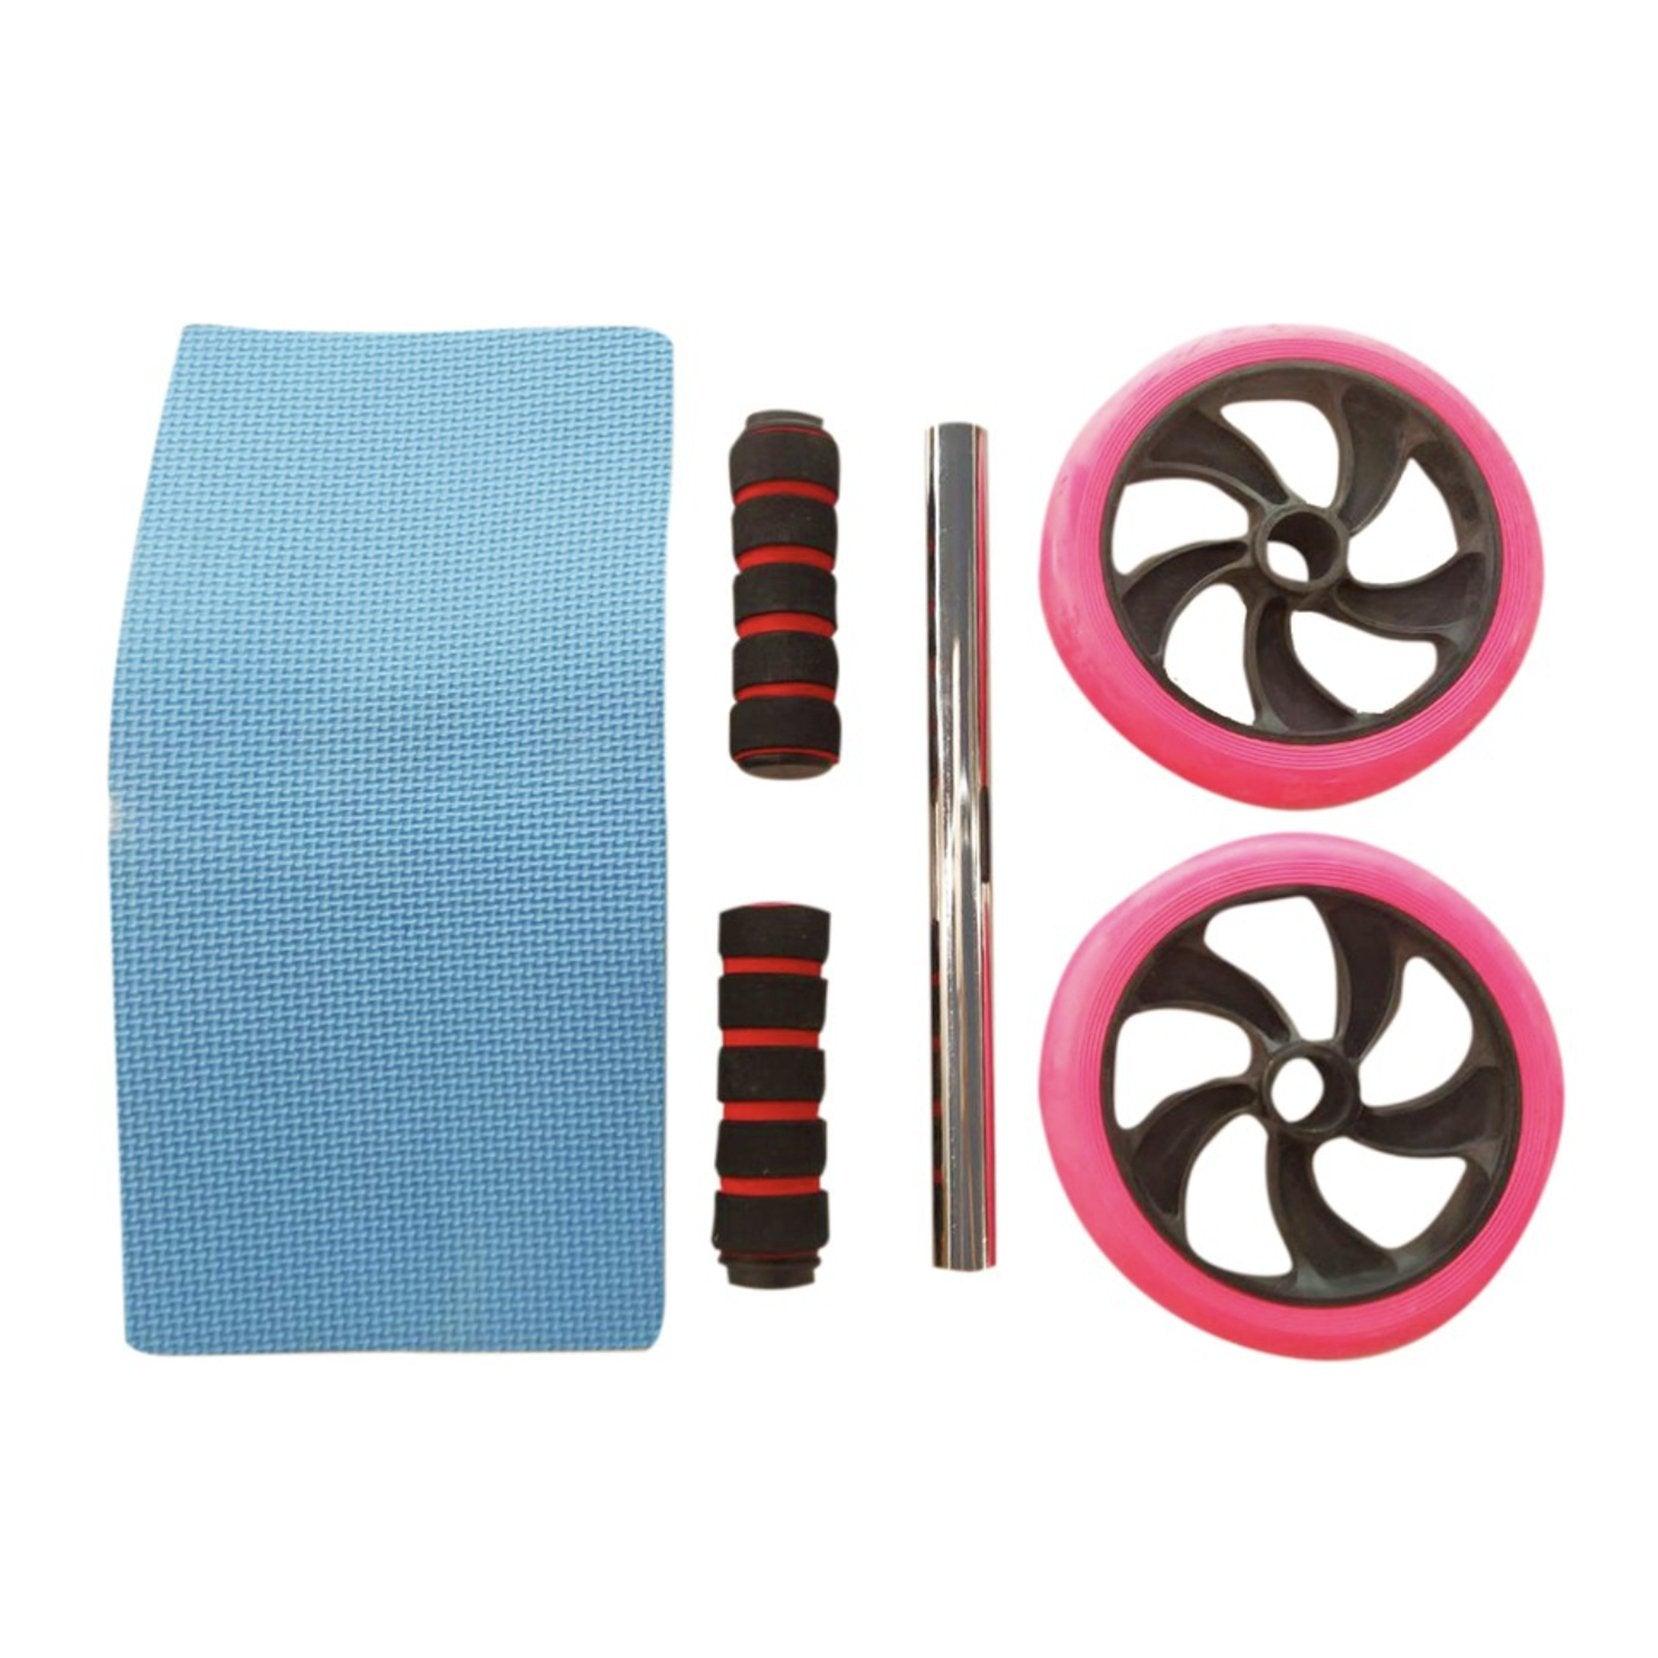 Quiet Wheel Abs Roller - Pink Fitness Equipment for Core Workout